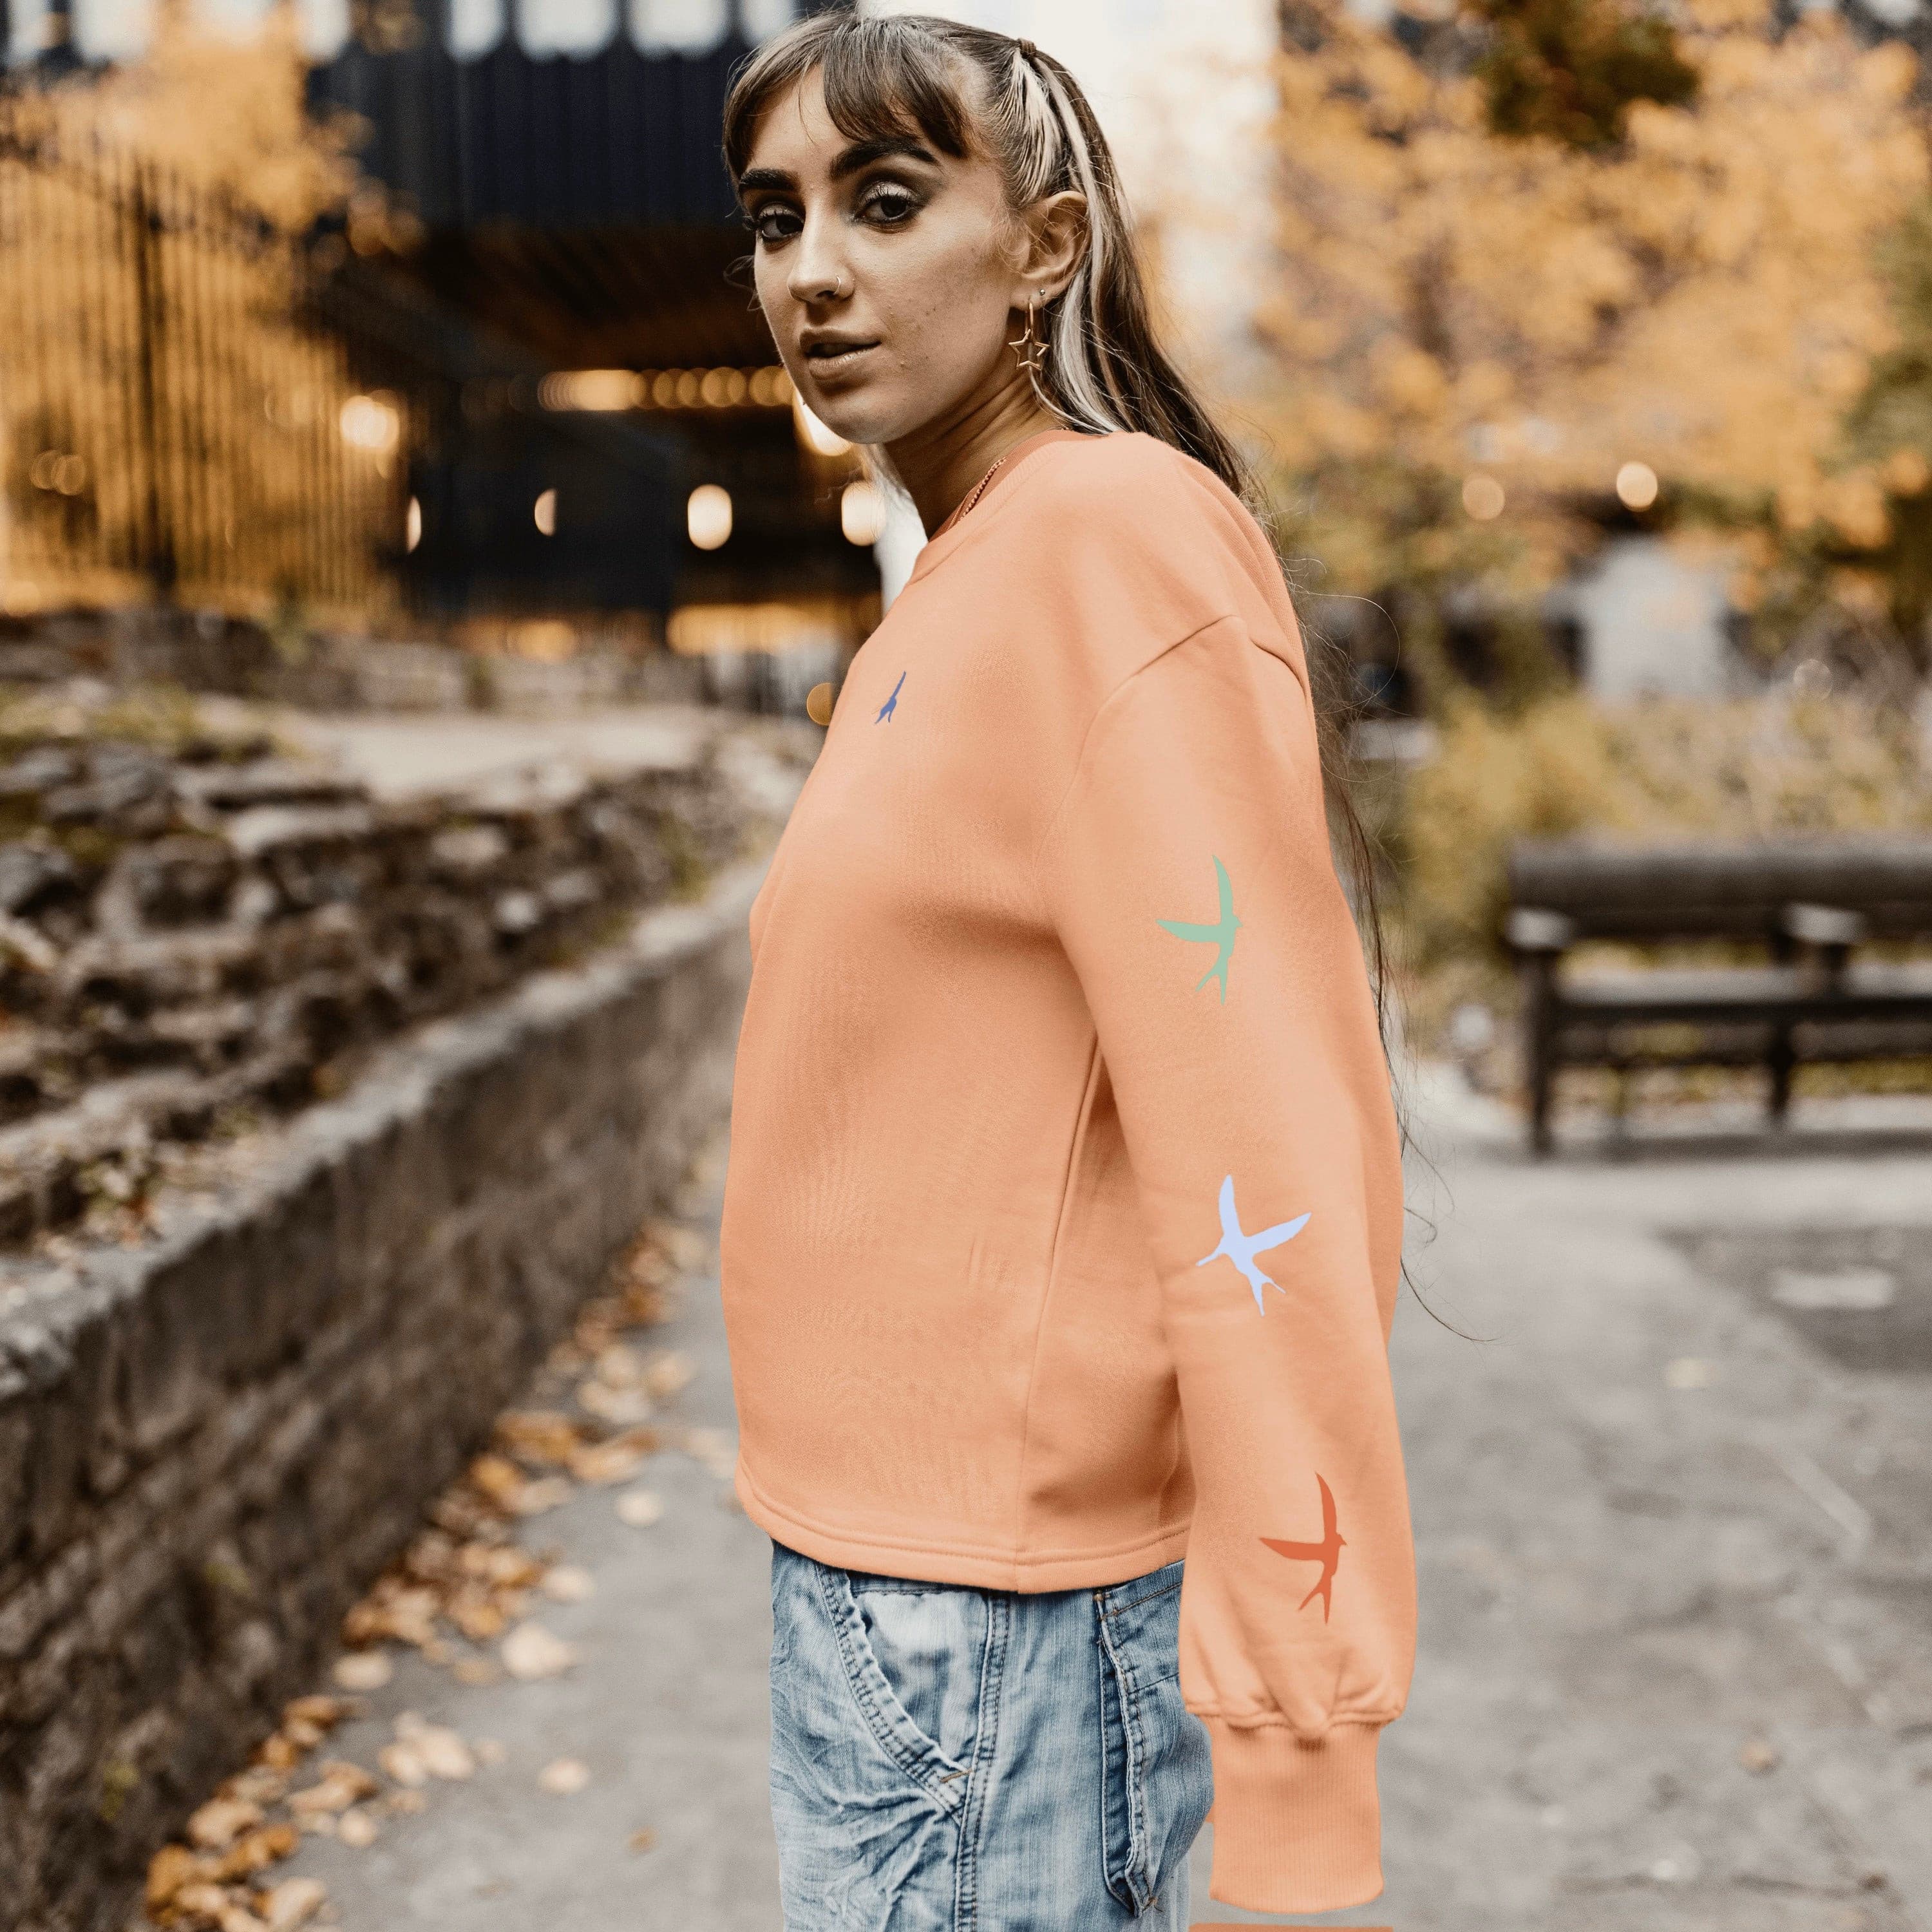 h clothing - female model side on wearing pastel orange sweatshirt with colourful birds going down left arm